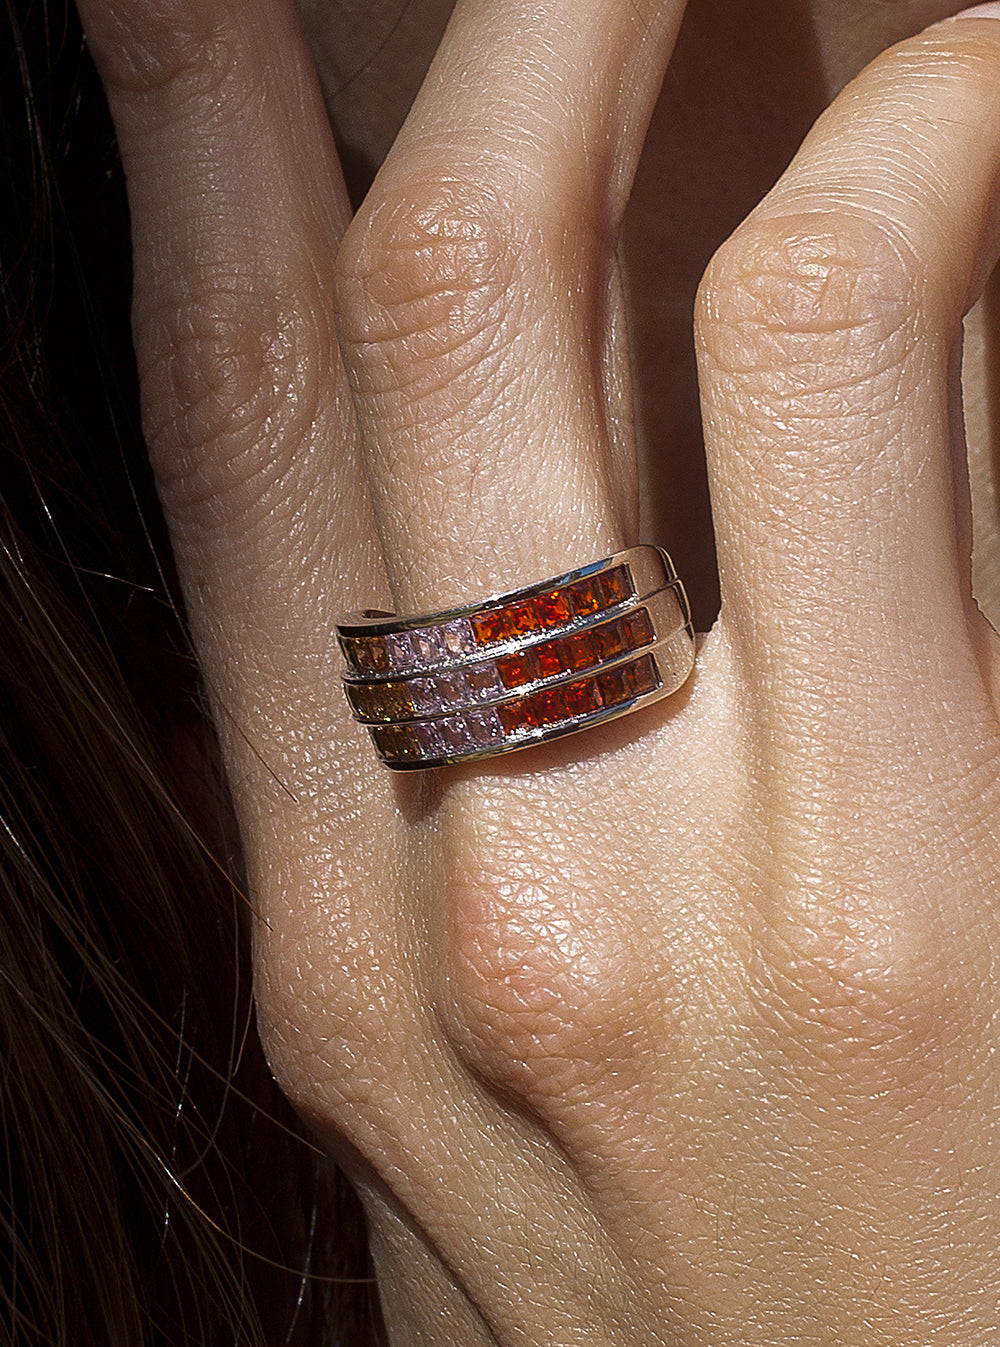 Rings with triple-ribbed stones in warm tones